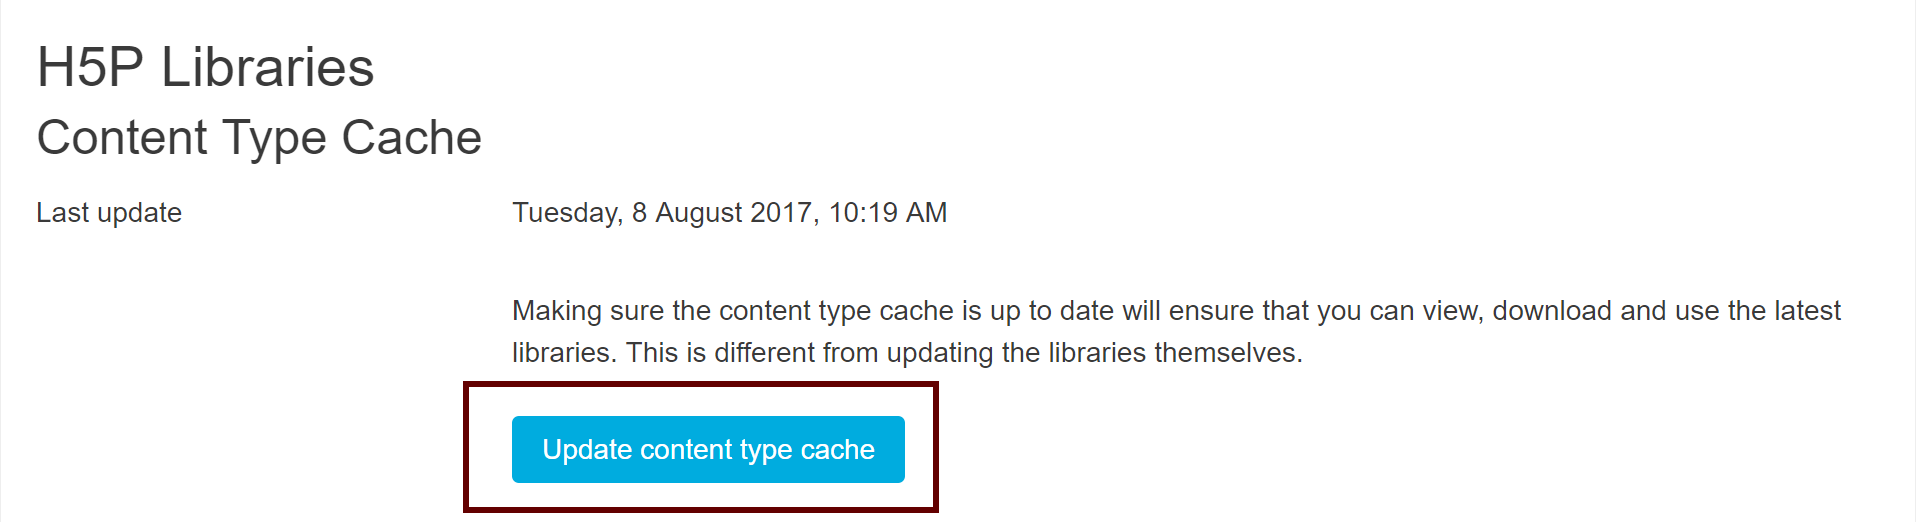 Image showing how to update Content Type Cache in Moodle